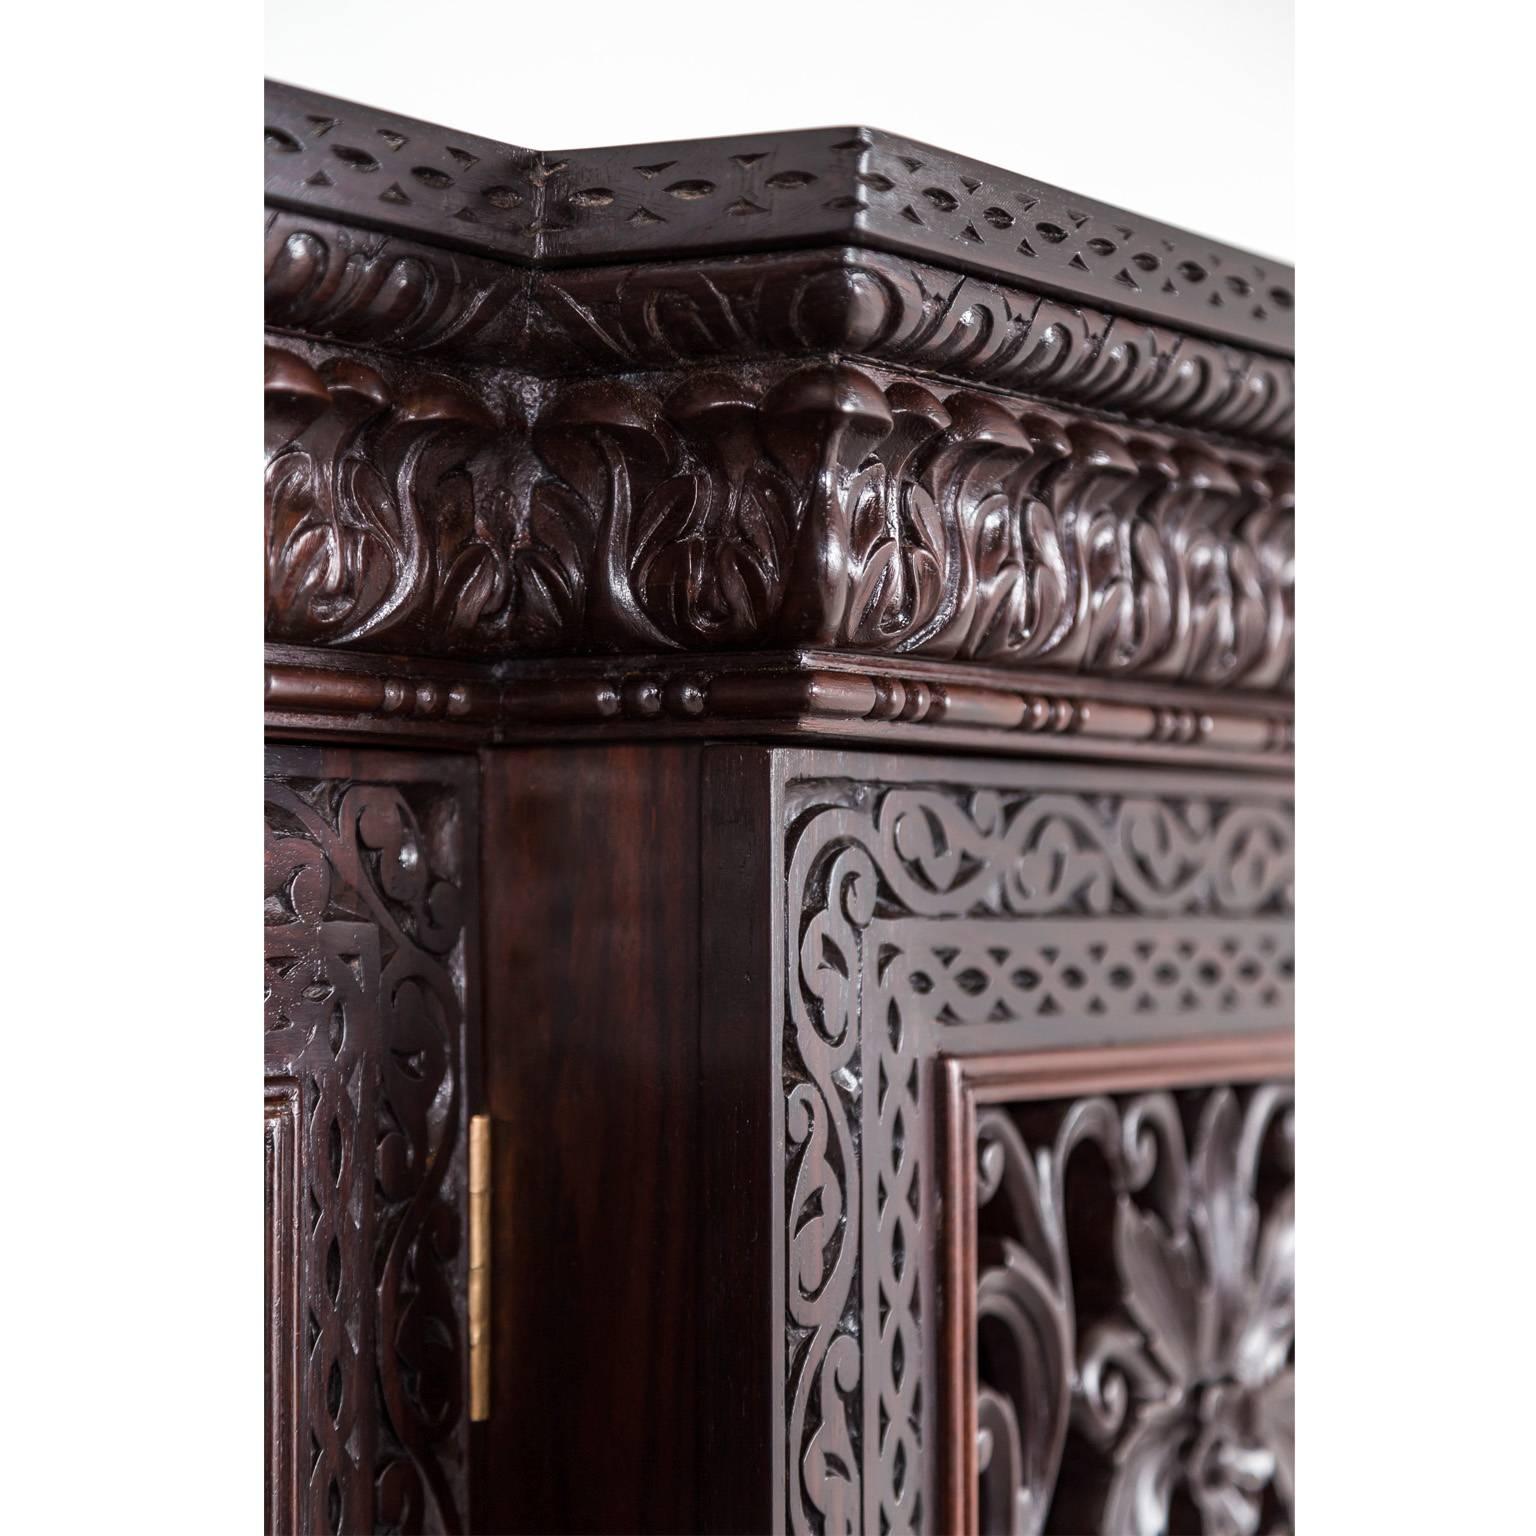 Anglo-Indian or British Colonial Rosewood Breakfront Cabinet 3